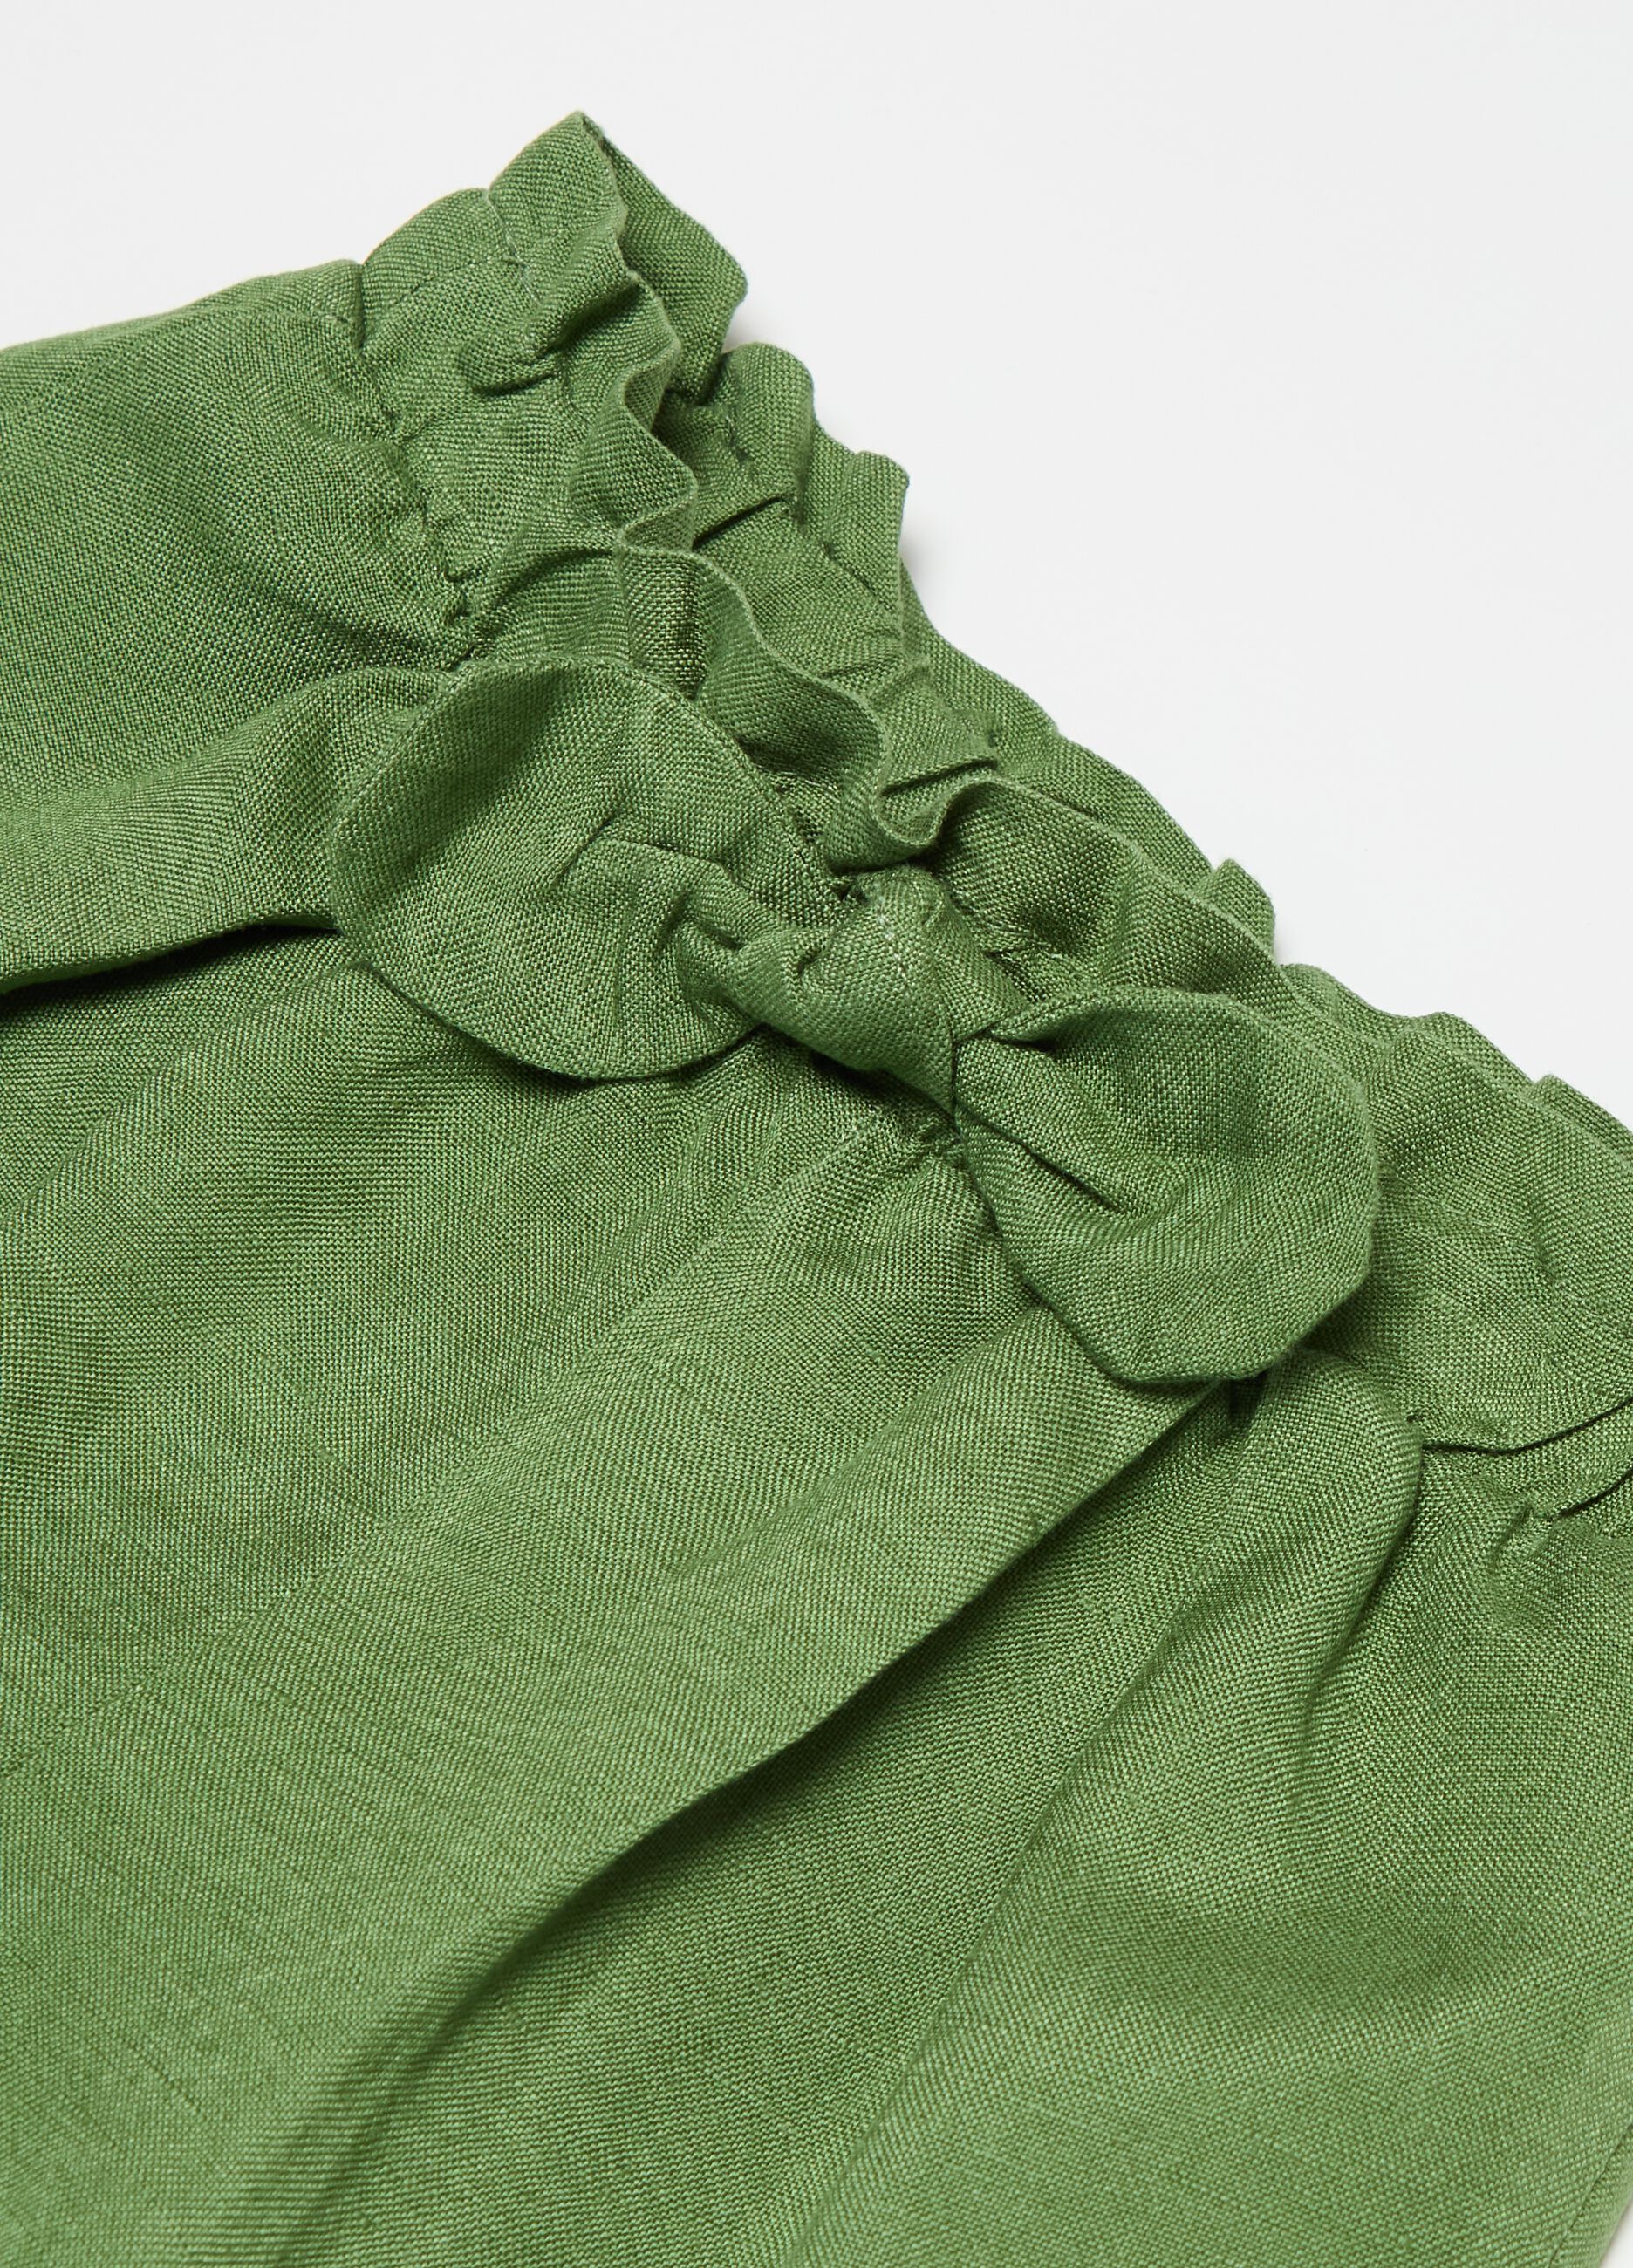 Viscose and ramie shorts with bow